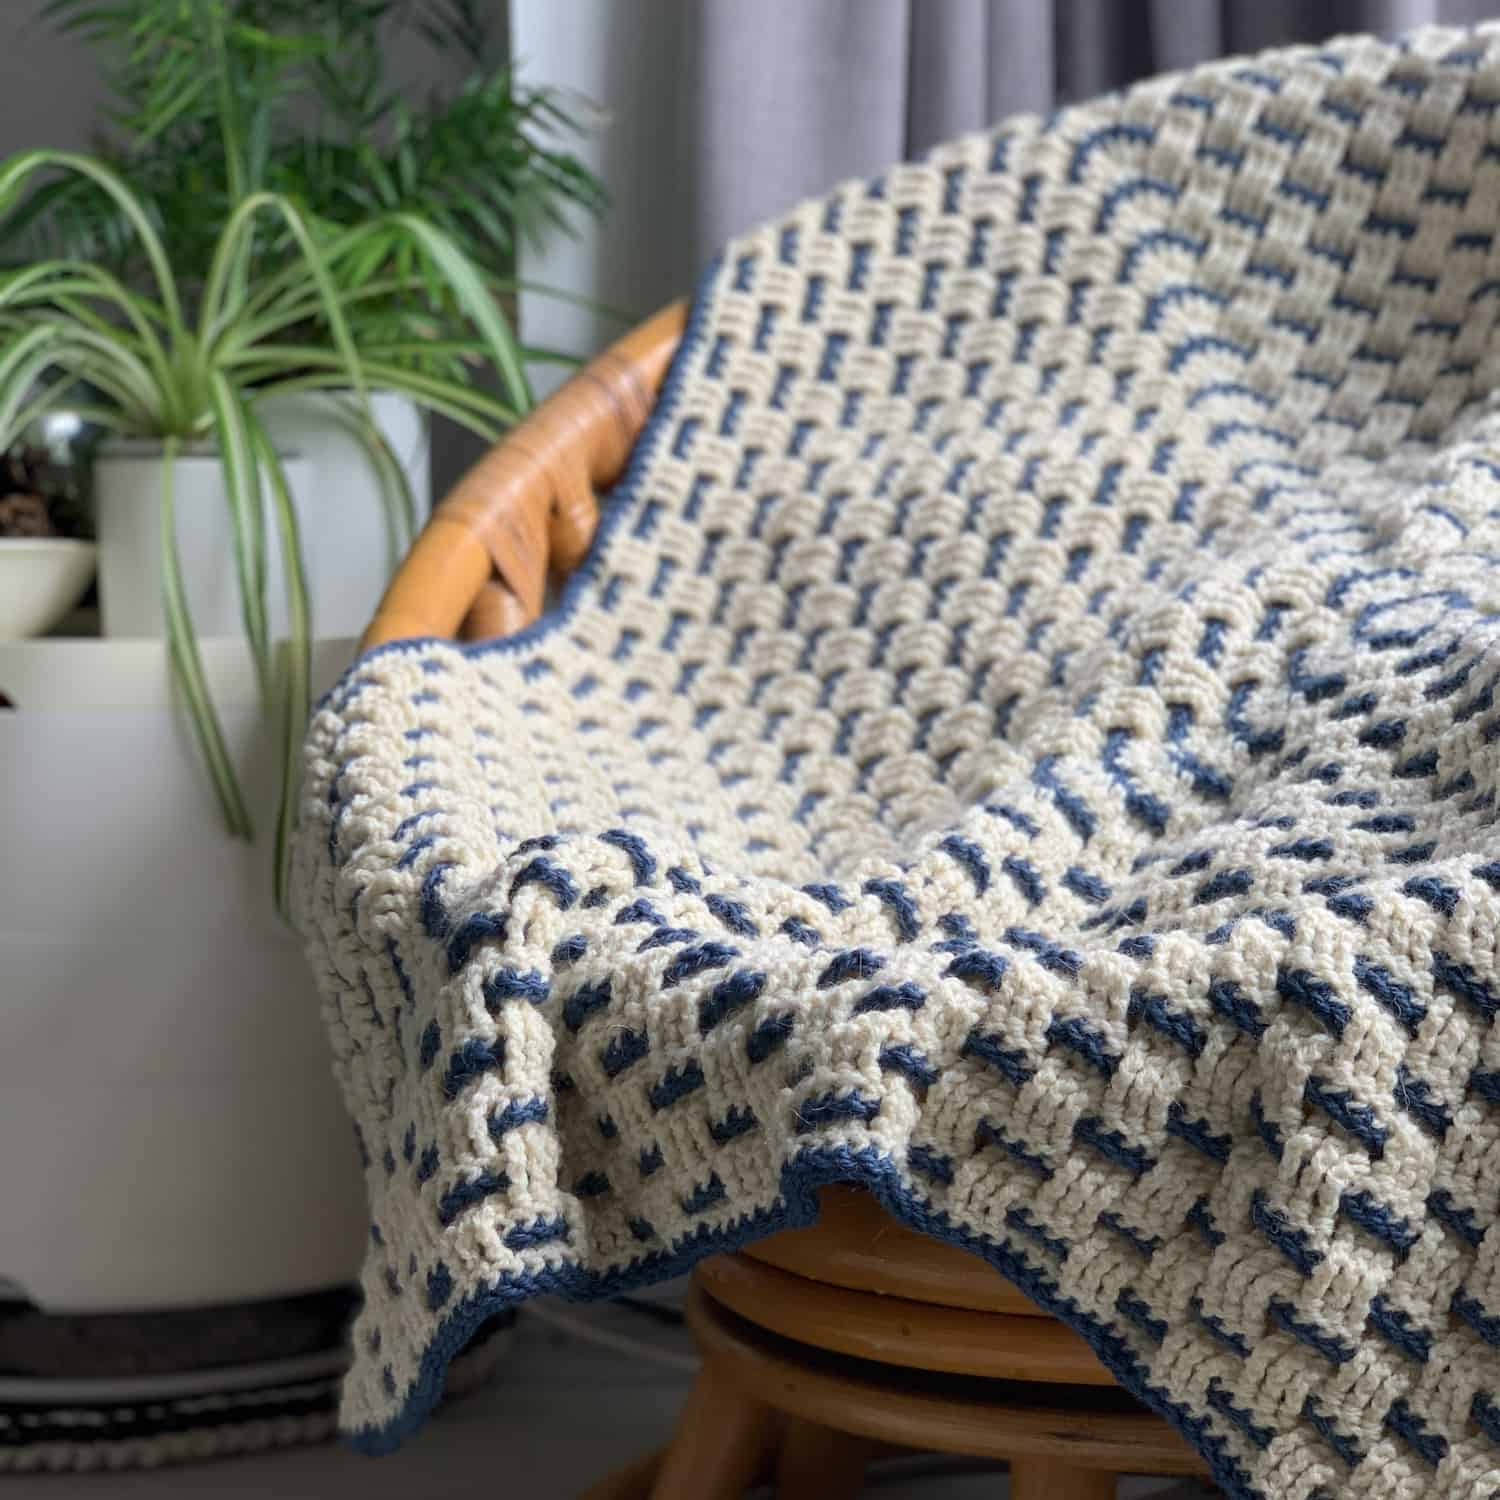 The granny weave crochet blanket is draped over a bamboo bucket chair.